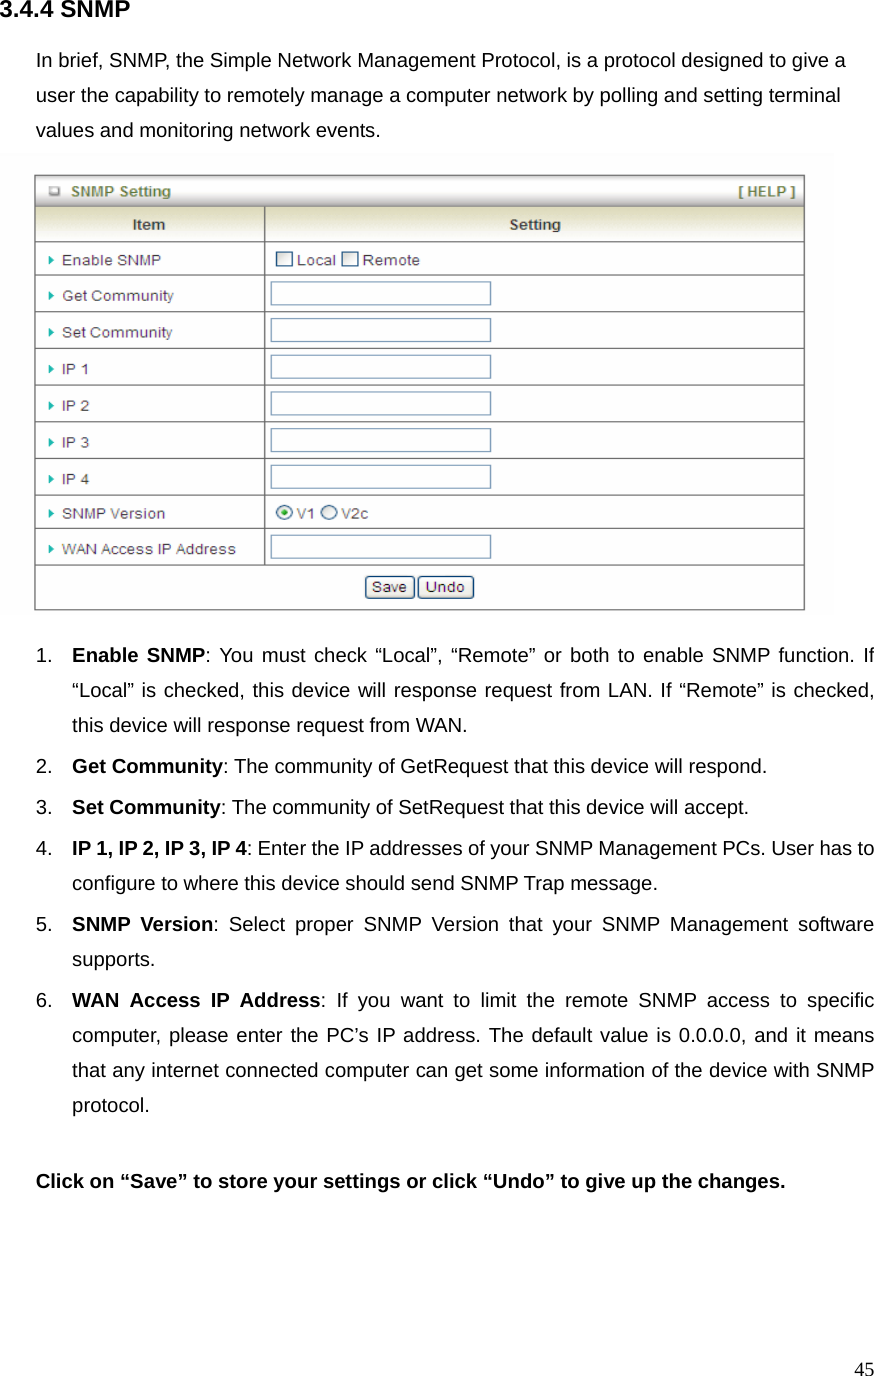  453.4.4 SNMP  In brief, SNMP, the Simple Network Management Protocol, is a protocol designed to give a user the capability to remotely manage a computer network by polling and setting terminal values and monitoring network events.     1.  Enable SNMP: You must check “Local”, “Remote” or both to enable SNMP function. If “Local” is checked, this device will response request from LAN. If “Remote” is checked, this device will response request from WAN. 2.  Get Community: The community of GetRequest that this device will respond. 3.  Set Community: The community of SetRequest that this device will accept. 4.  IP 1, IP 2, IP 3, IP 4: Enter the IP addresses of your SNMP Management PCs. User has to configure to where this device should send SNMP Trap message. 5.  SNMP Version: Select proper SNMP Version that your SNMP Management software supports. 6.  WAN Access IP Address: If you want to limit the remote SNMP access to specific computer, please enter the PC’s IP address. The default value is 0.0.0.0, and it means that any internet connected computer can get some information of the device with SNMP protocol.  Click on “Save” to store your settings or click “Undo” to give up the changes.   